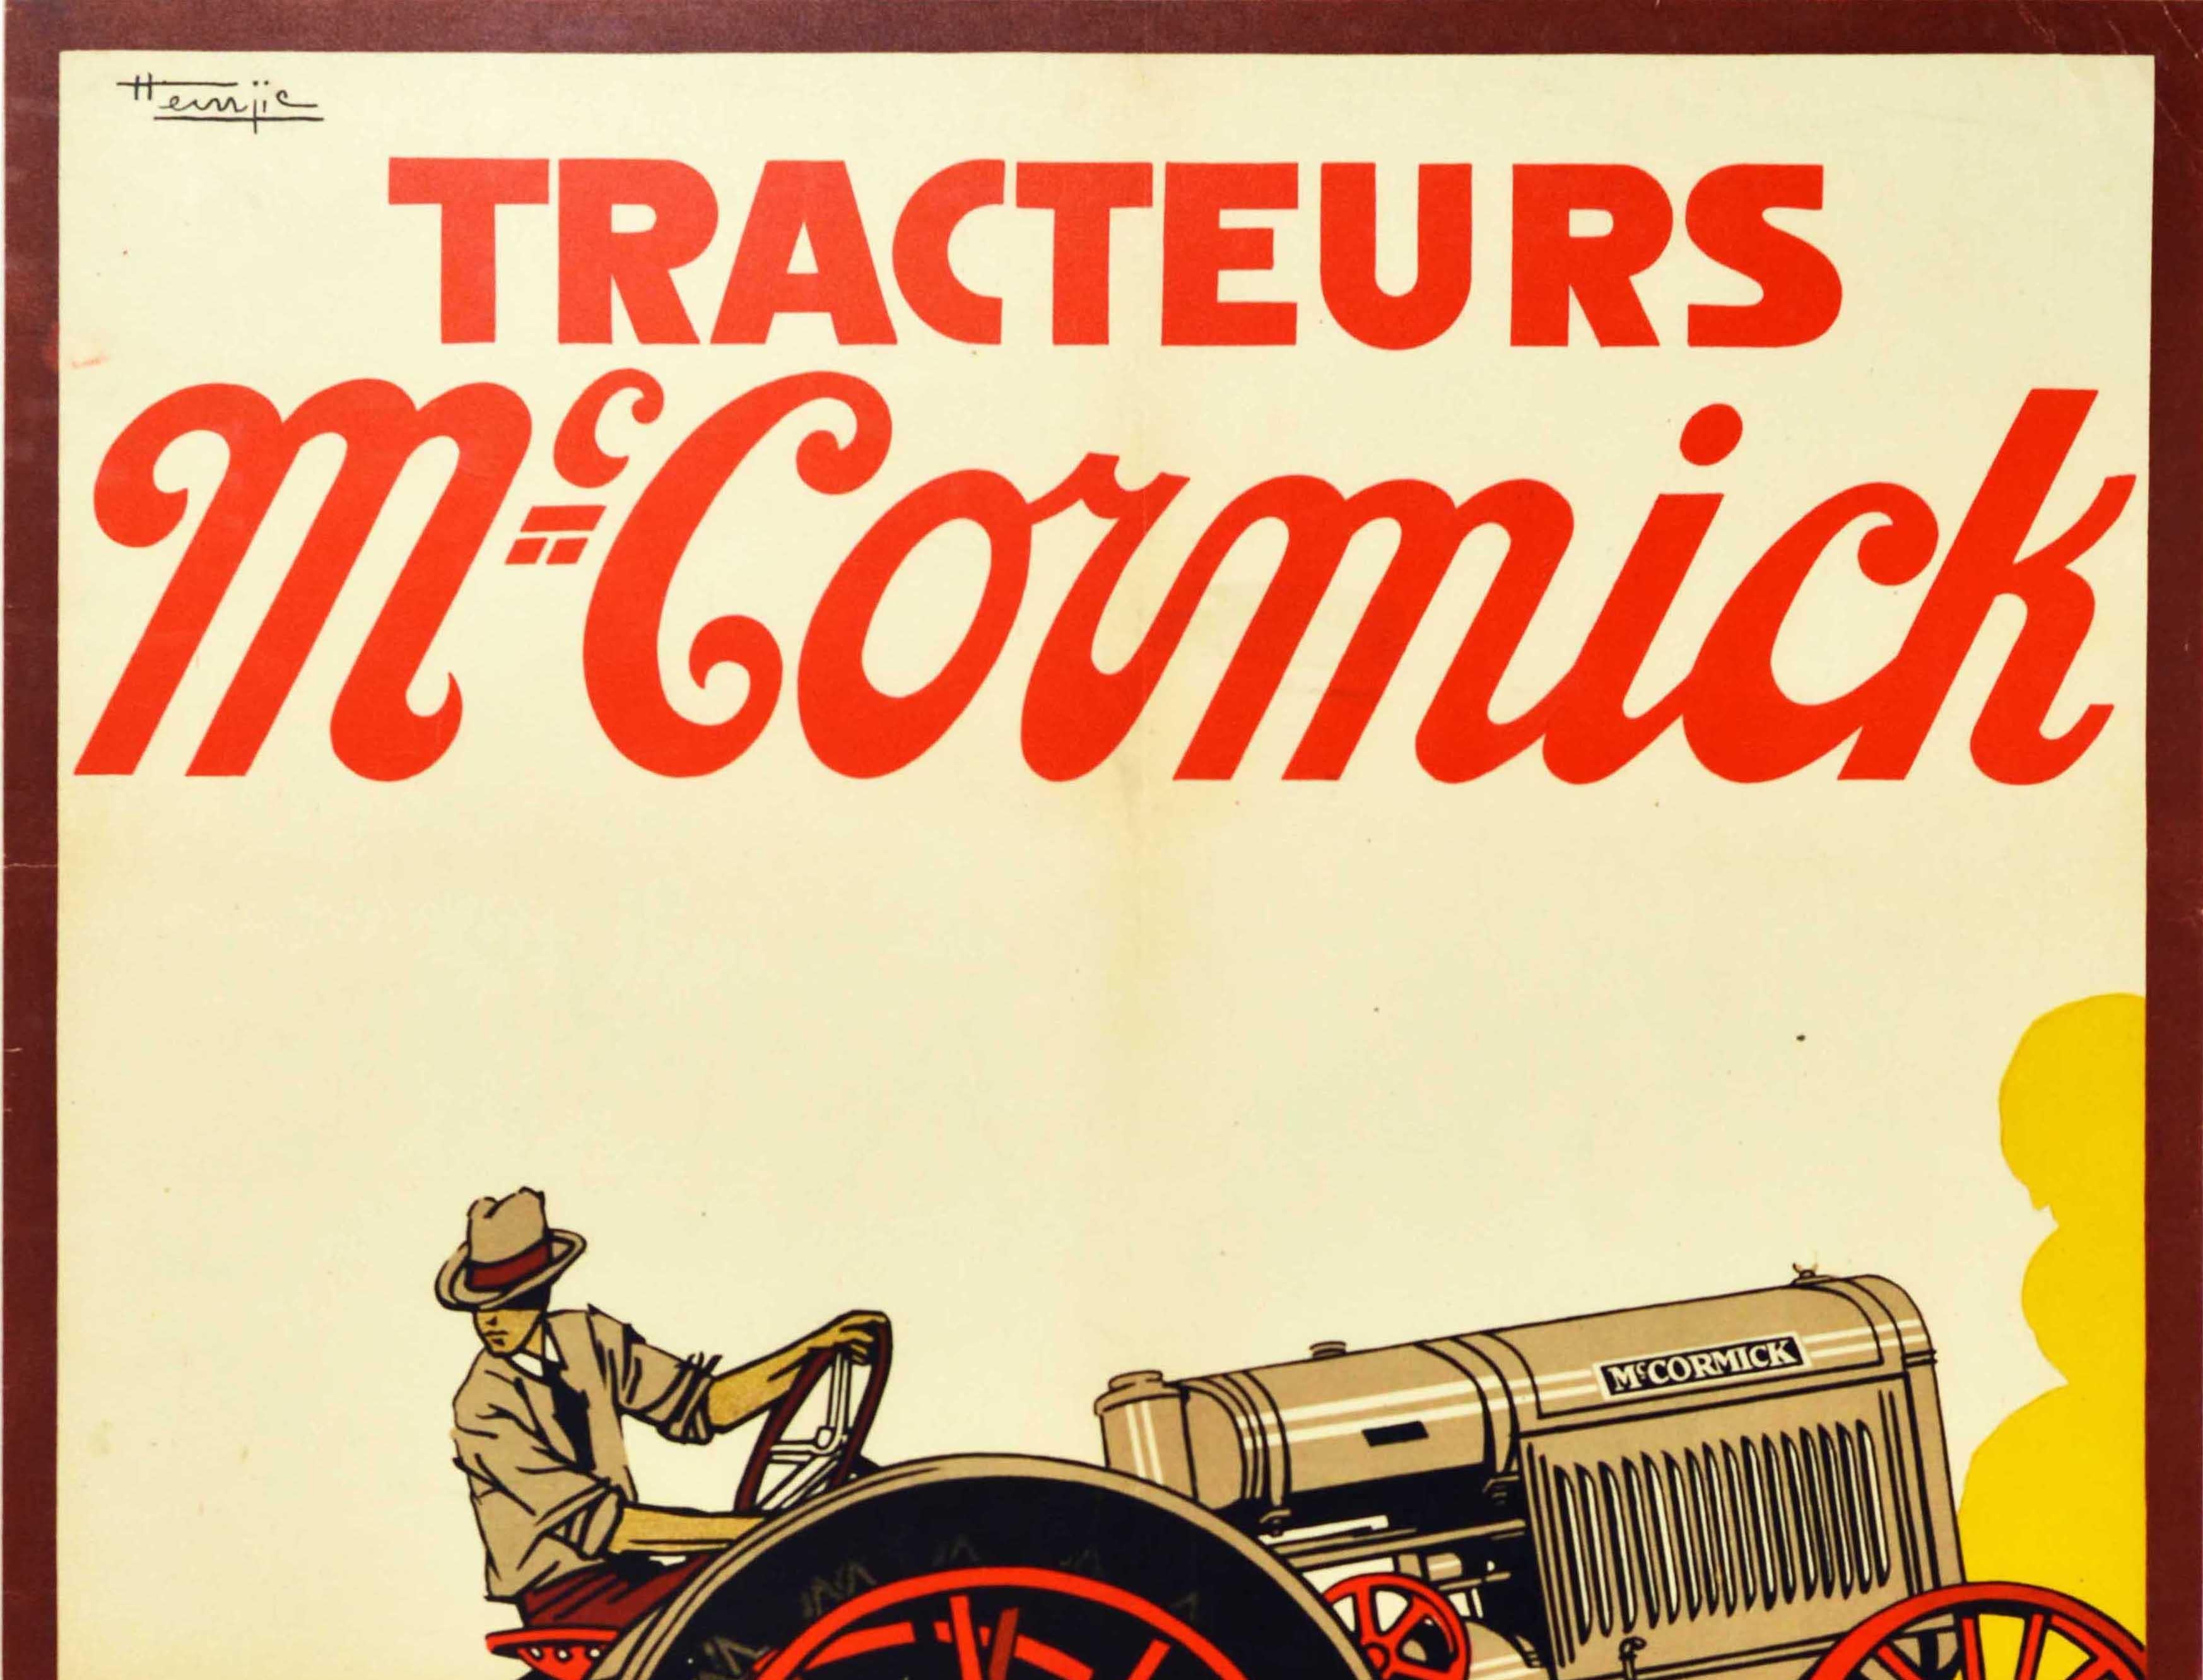 Original vintage advertising poster for the French dealer of McCormick tractors - Tracteurs McCormick Machines Agricoles R. Wallut & Cie - featuring a great farming design depicting a shiny new agricultural tractor driving up a muddy hill and